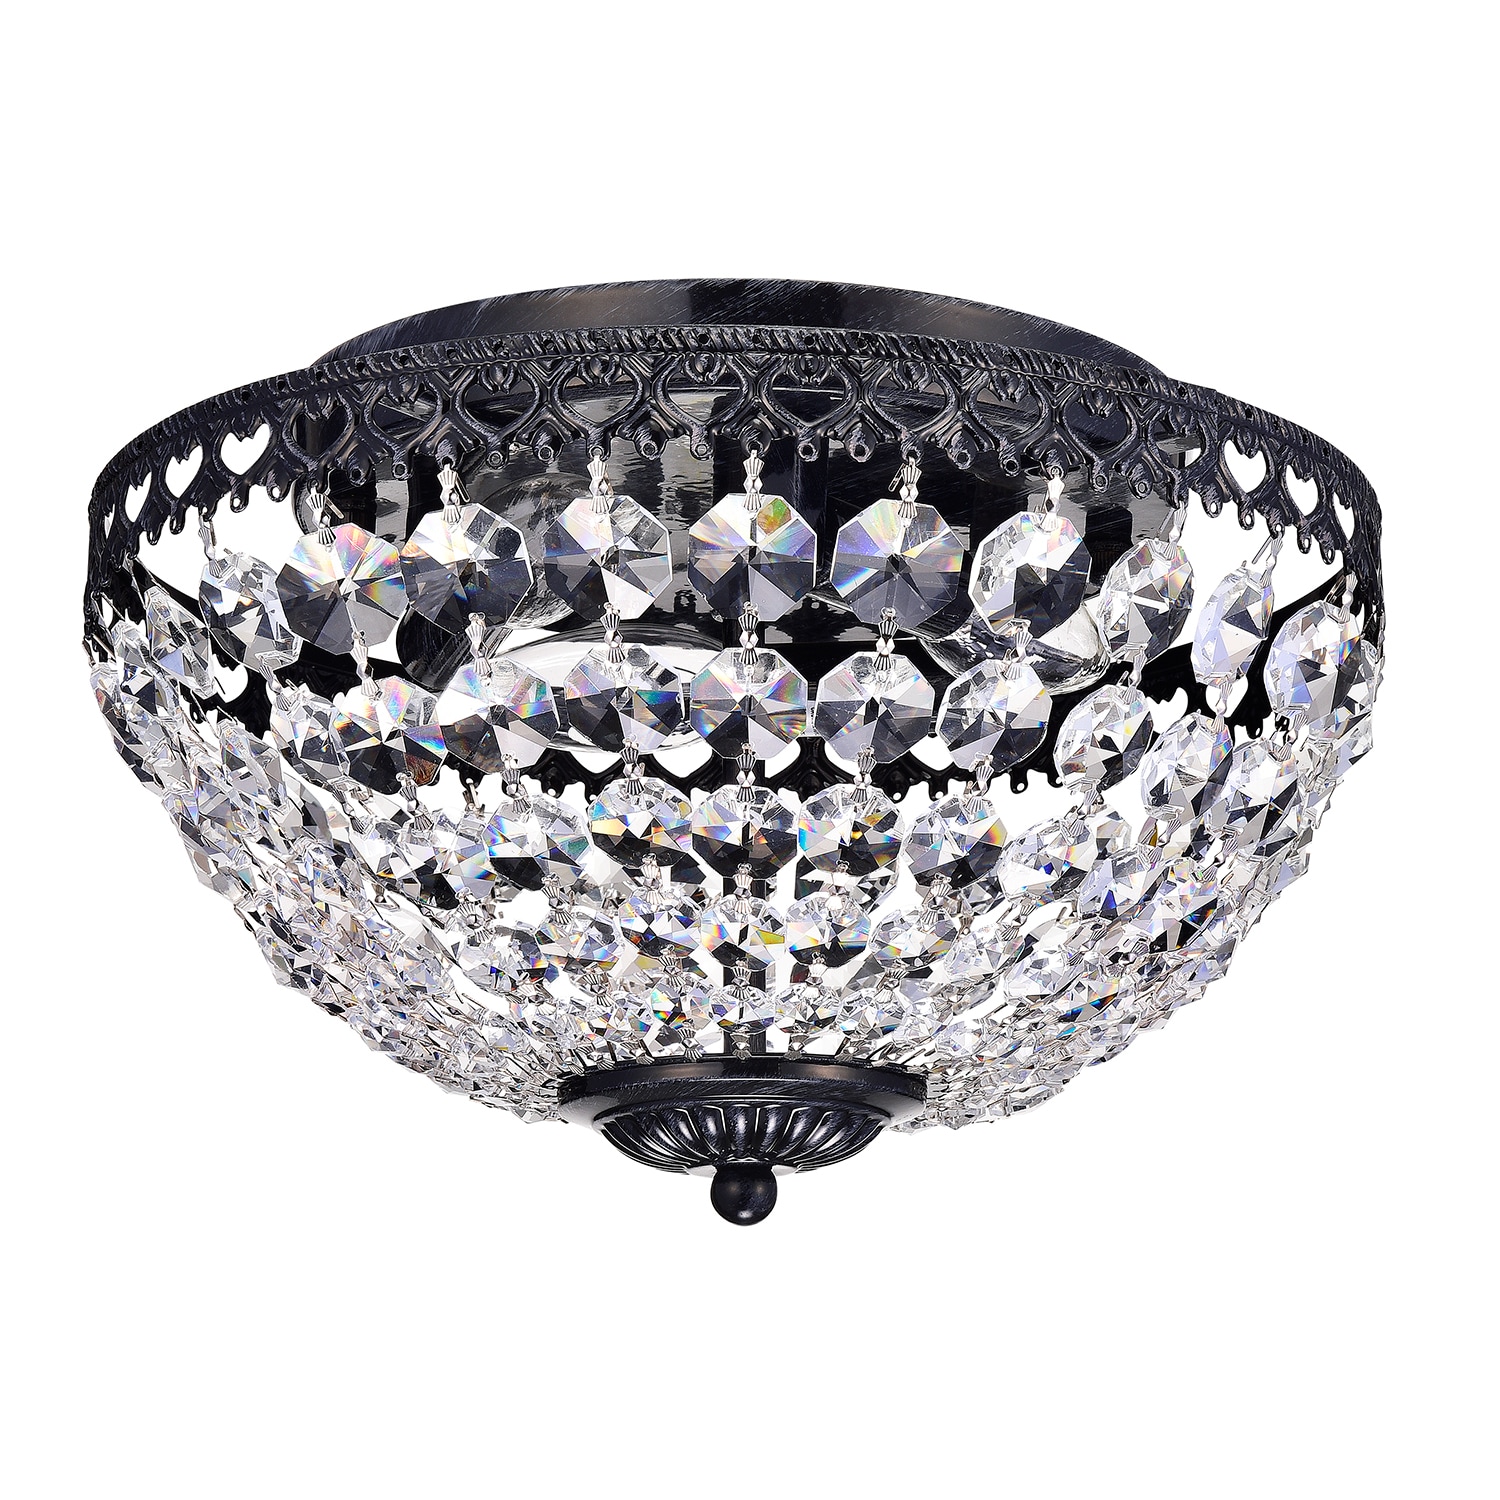 Vintage Iron Black Bowl Shaded with 3 Tiers Glittering Crystal Pendant lights 